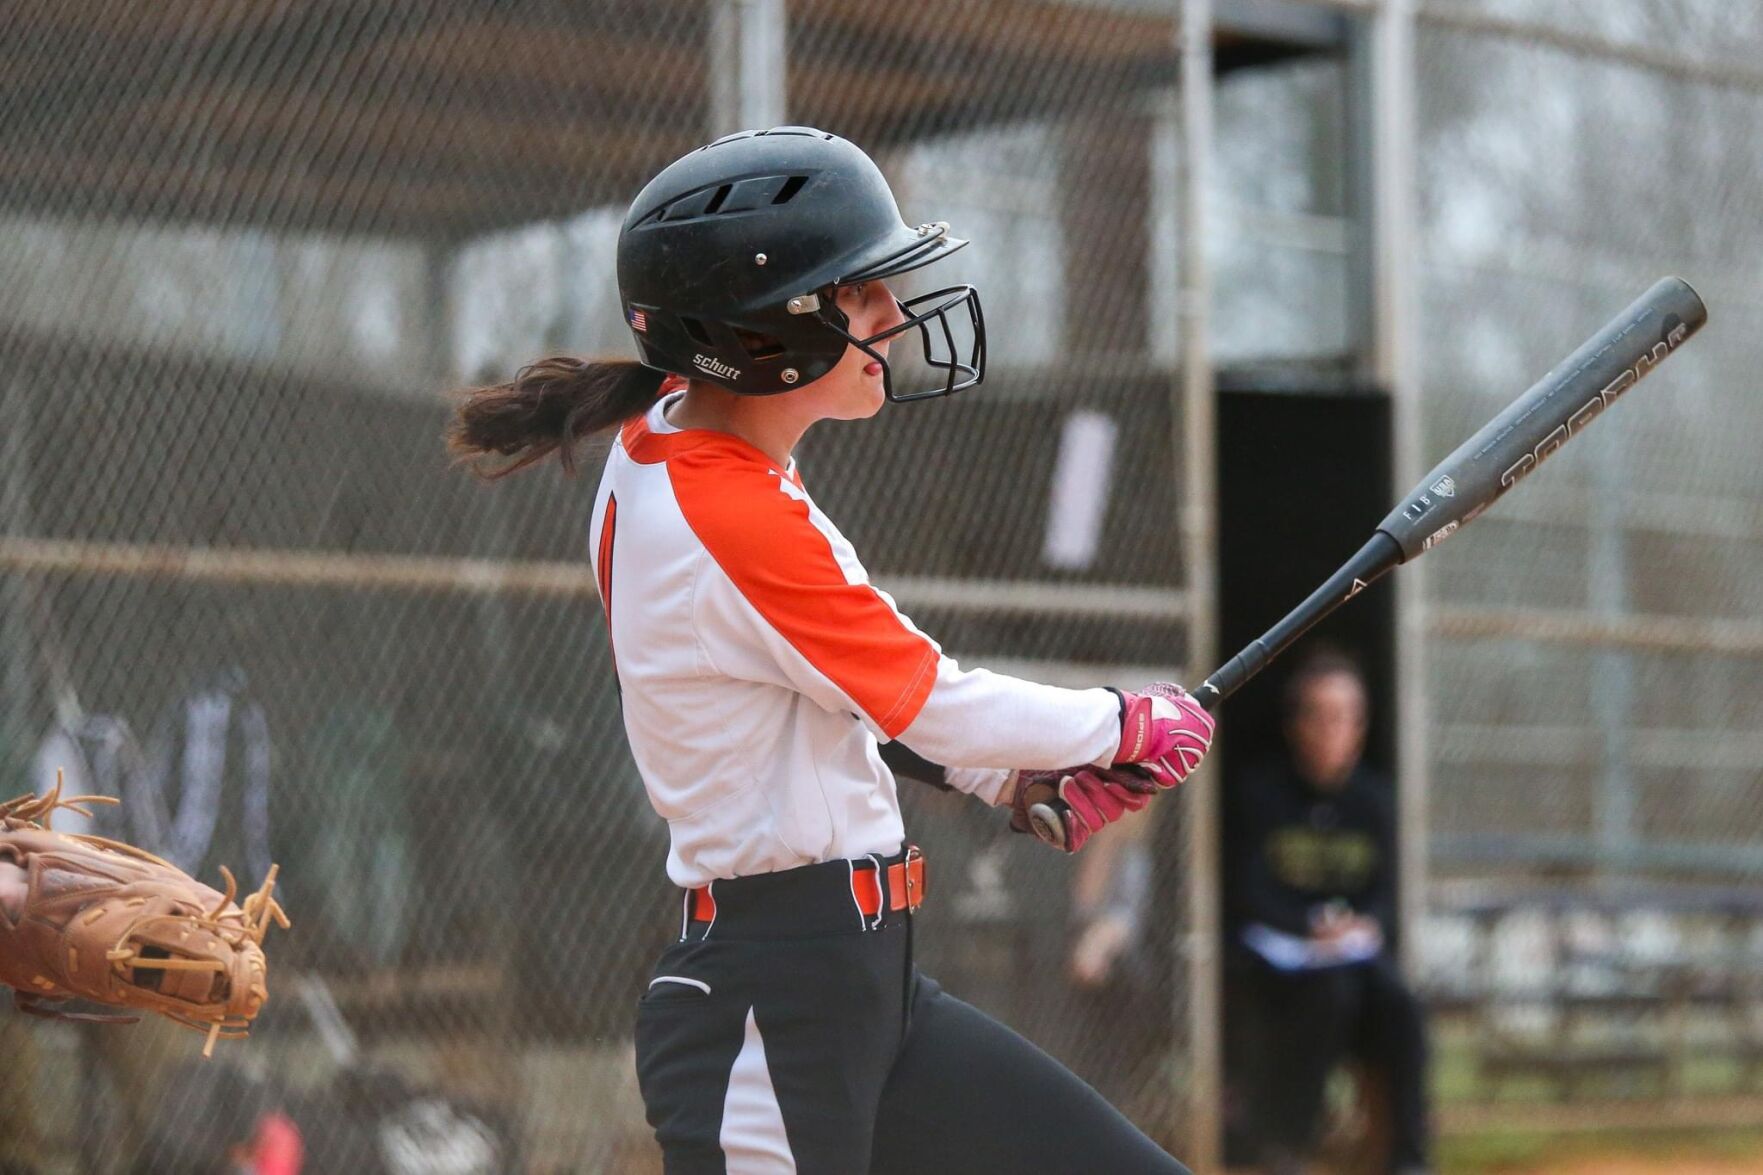 COMEBACK WIN: Lady Yellow Jackets rally from three-run deficit to defeat Barbourville, 12-6